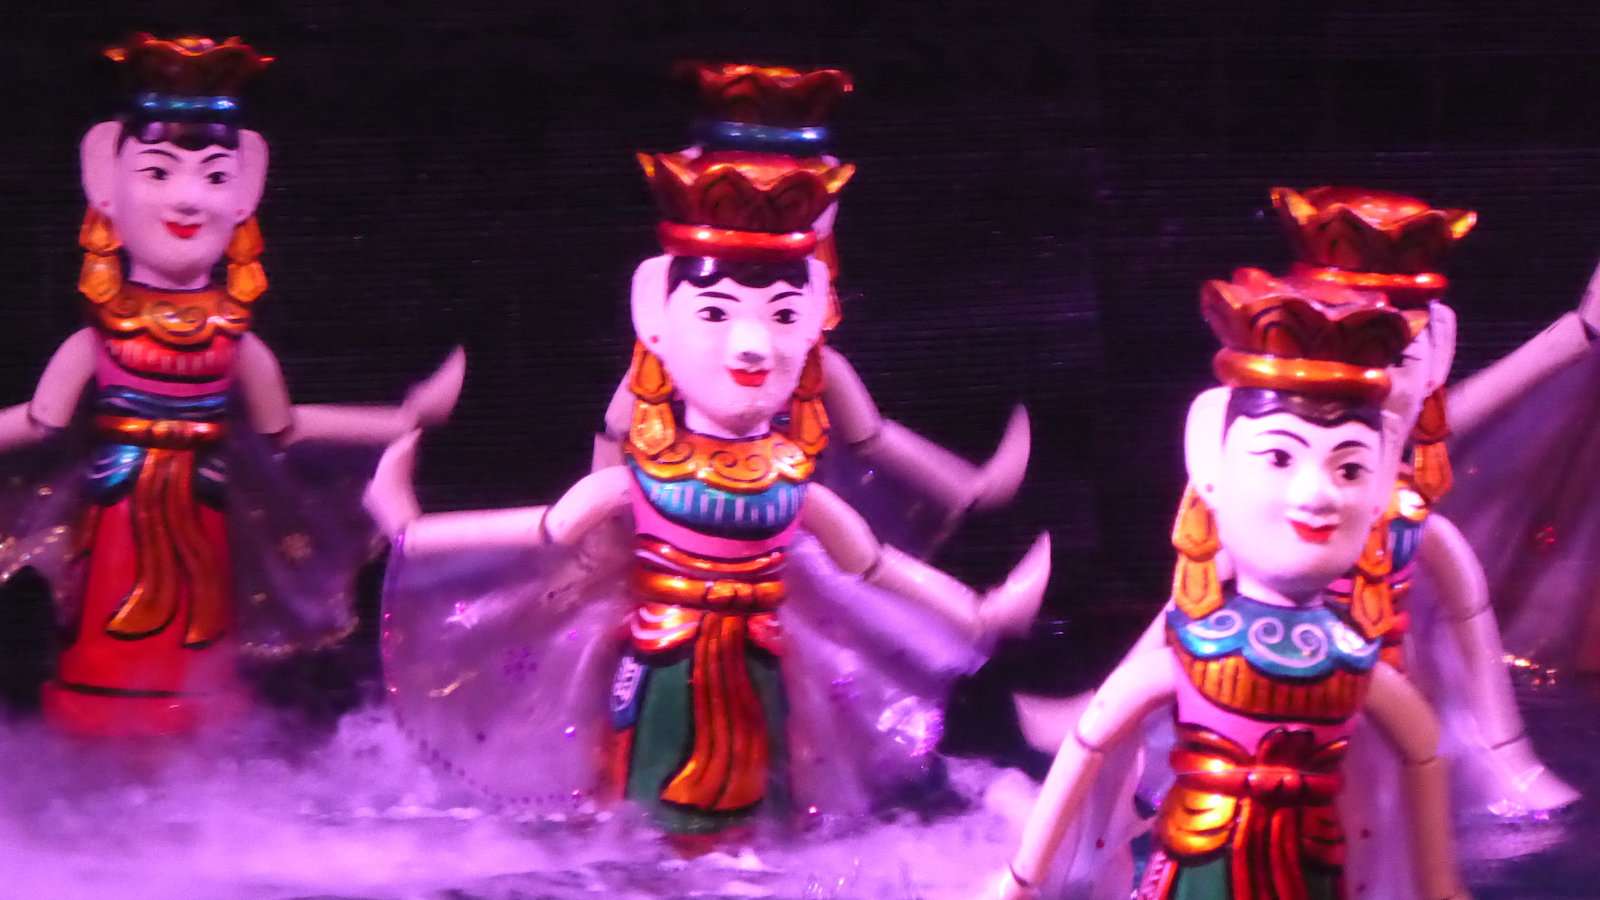 Water puppetry is a time-honored tradition of Vietnam which we recommend you see for yourself